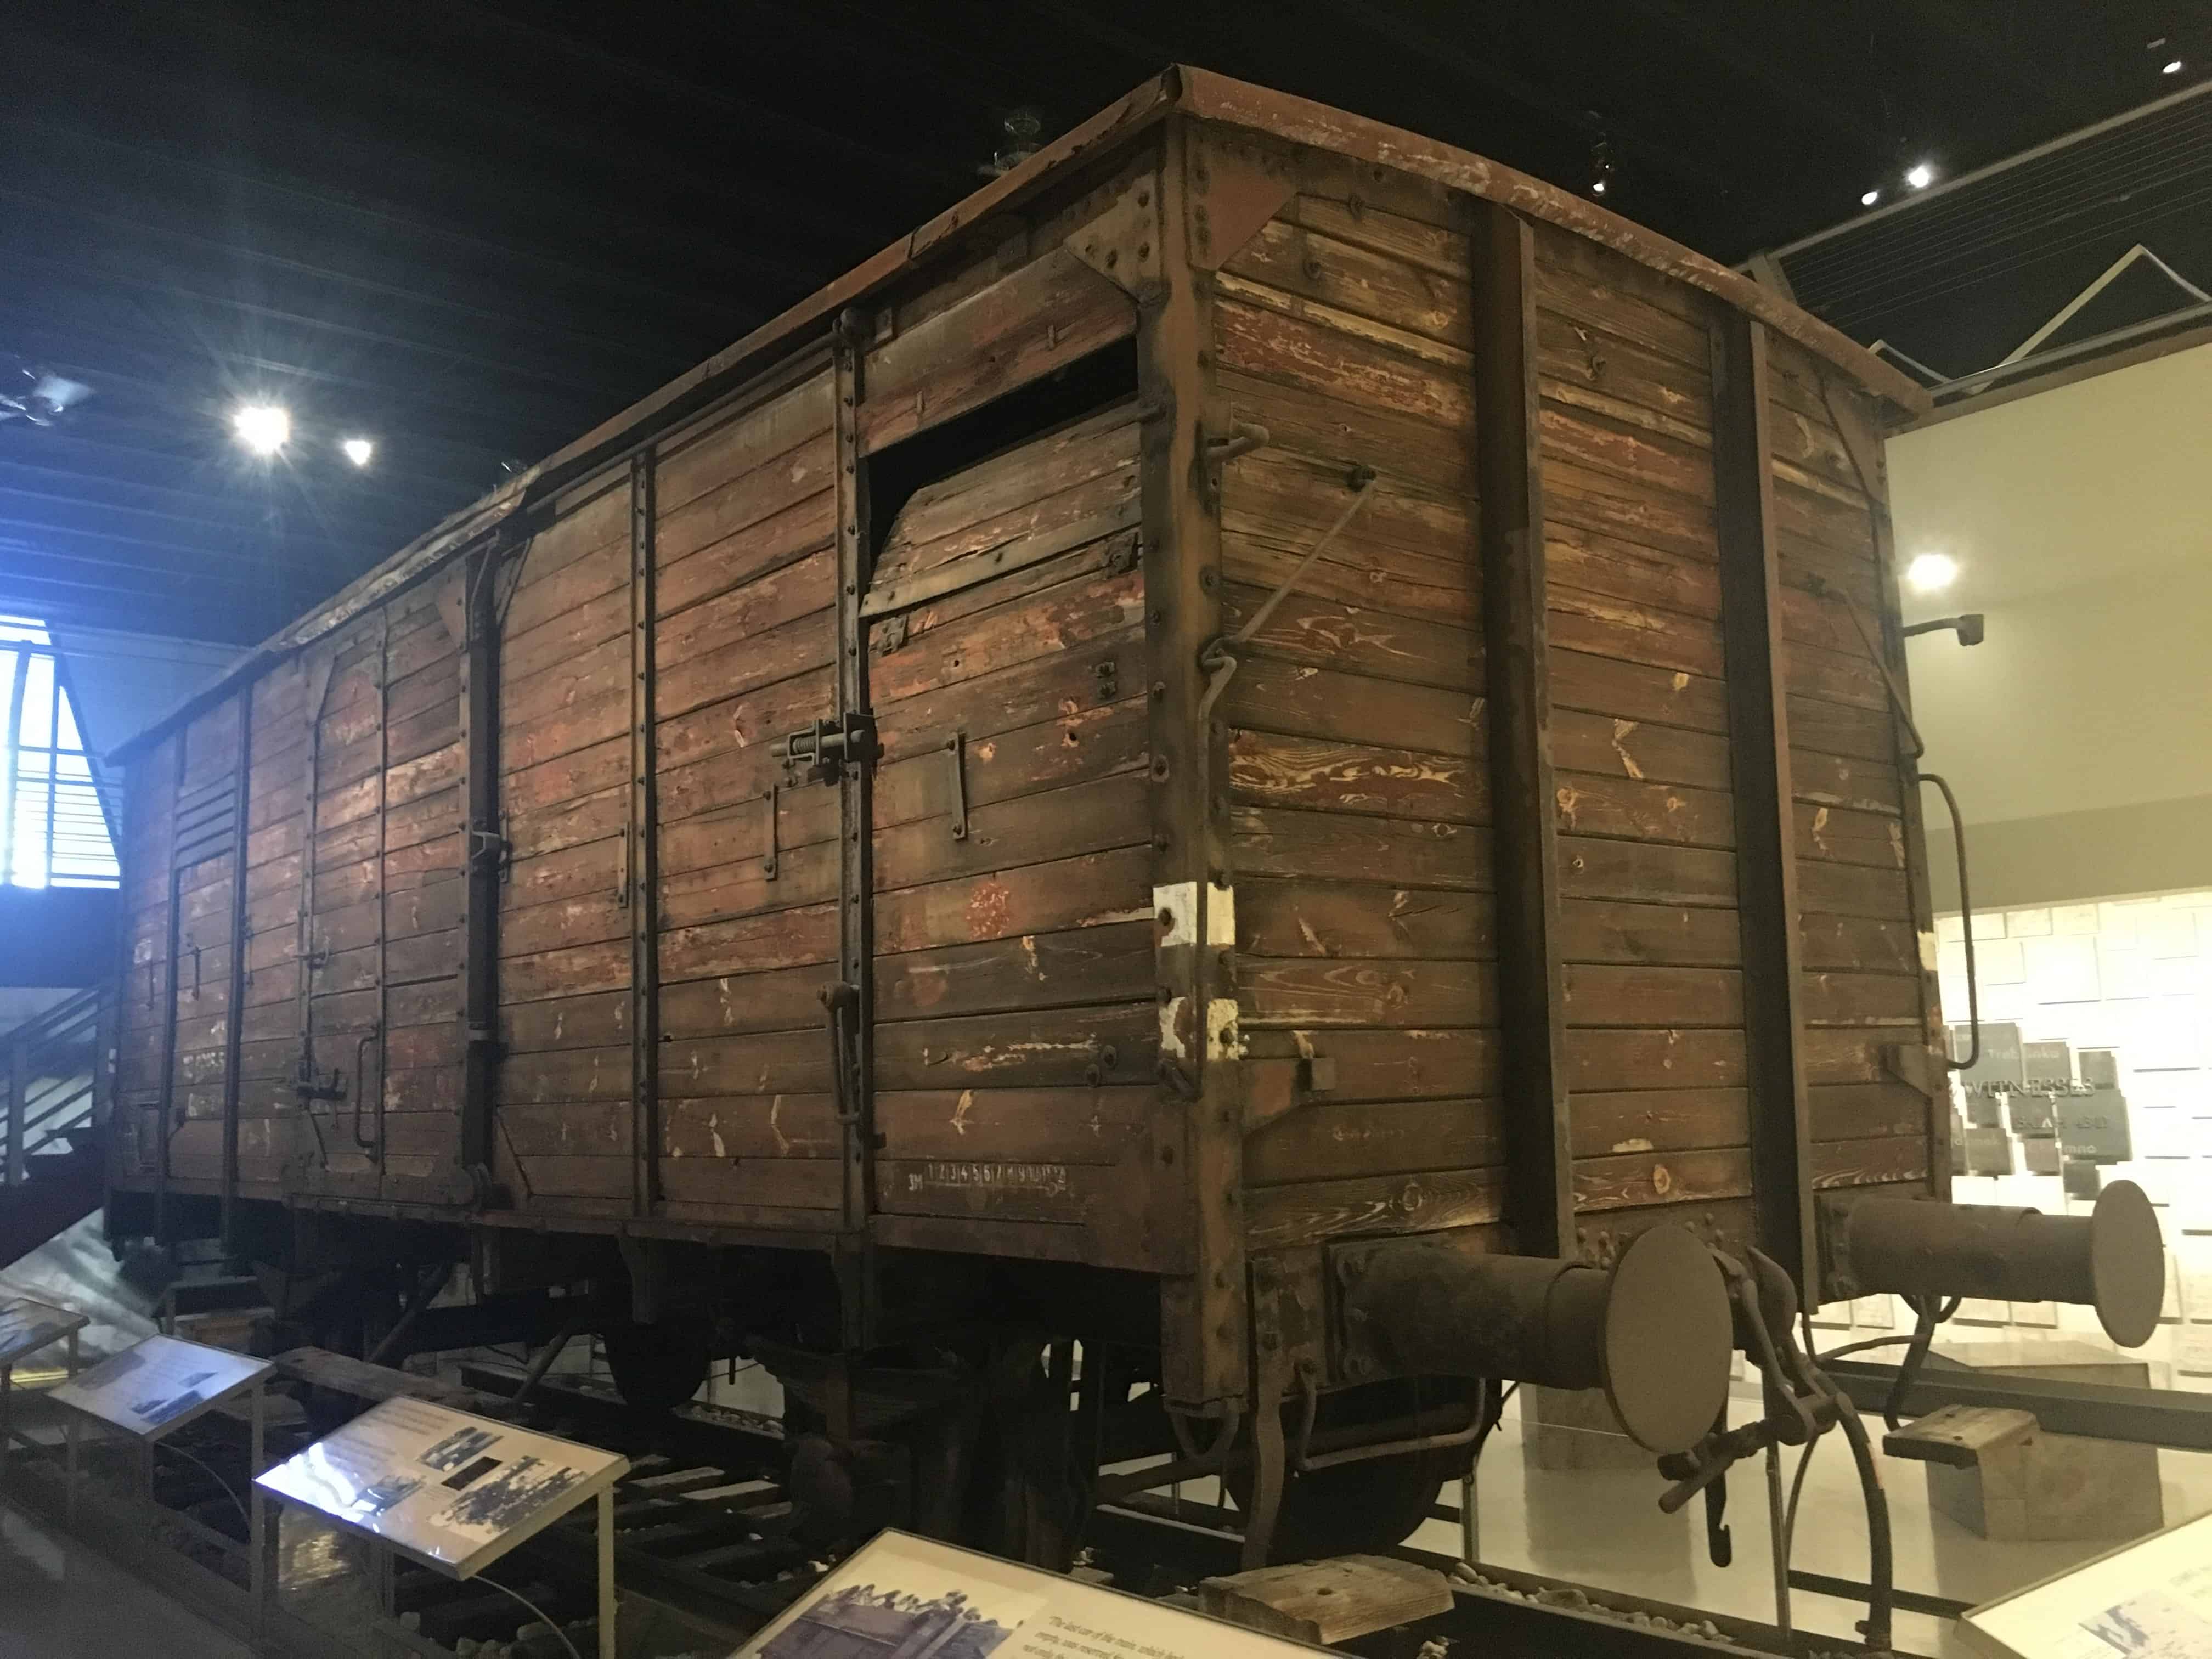 Boxcar at the Florida Holocaust Museum in St. Petersburg, Florida